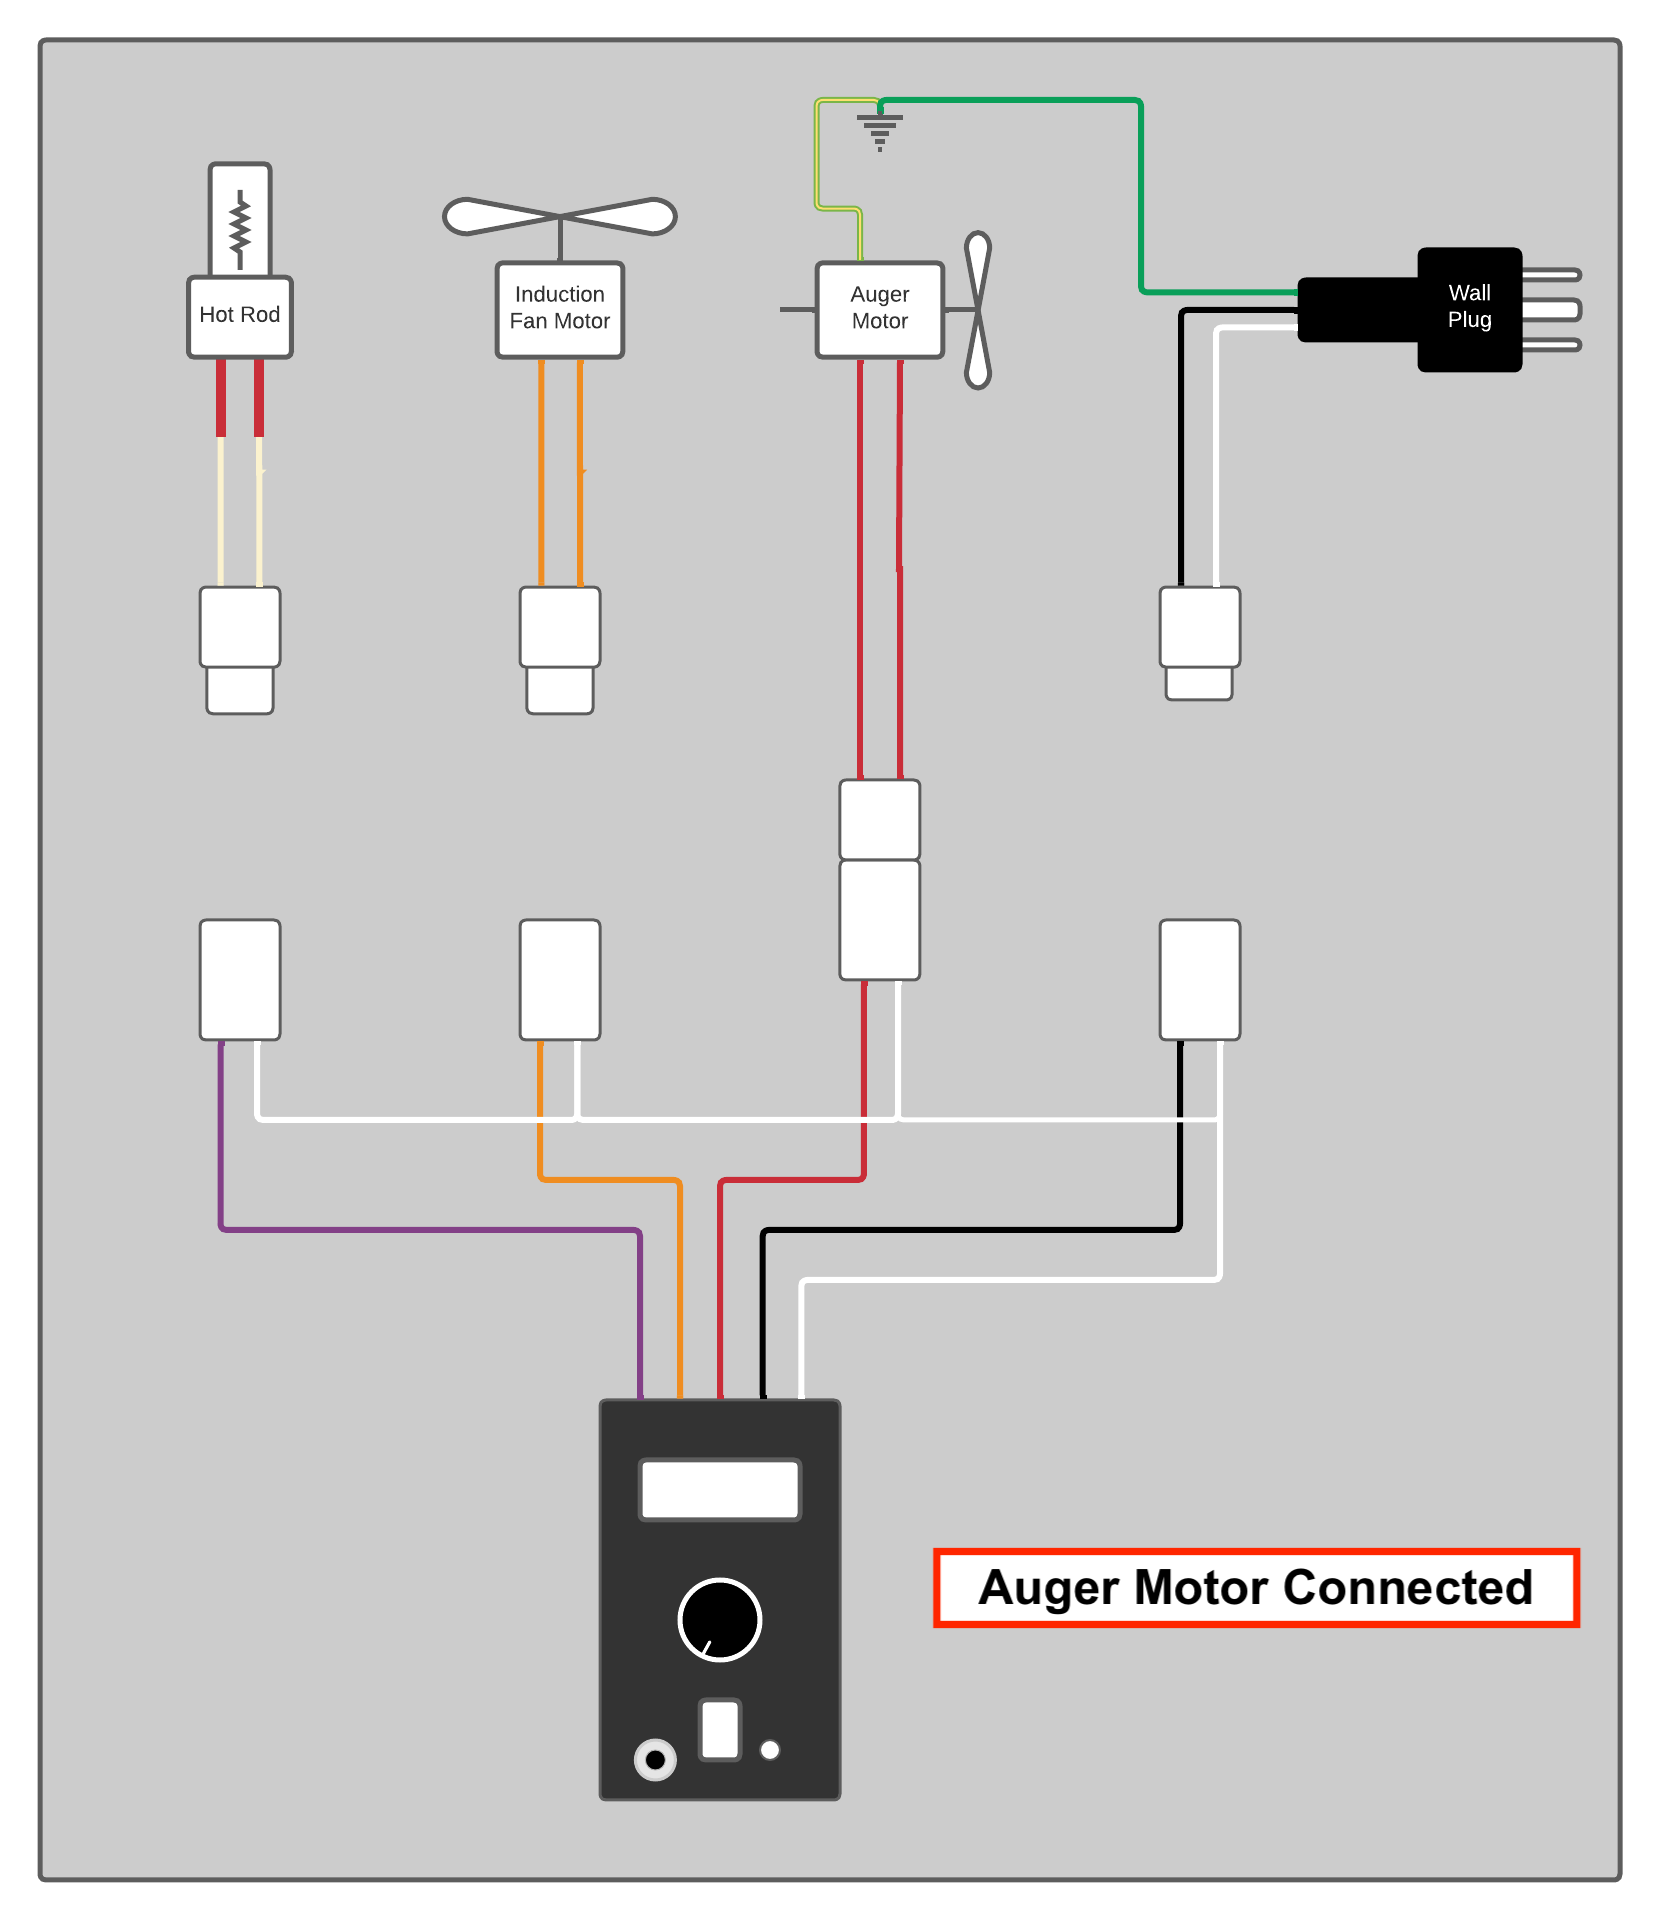 7_Auger_Motor_Connected__Wiring_.png